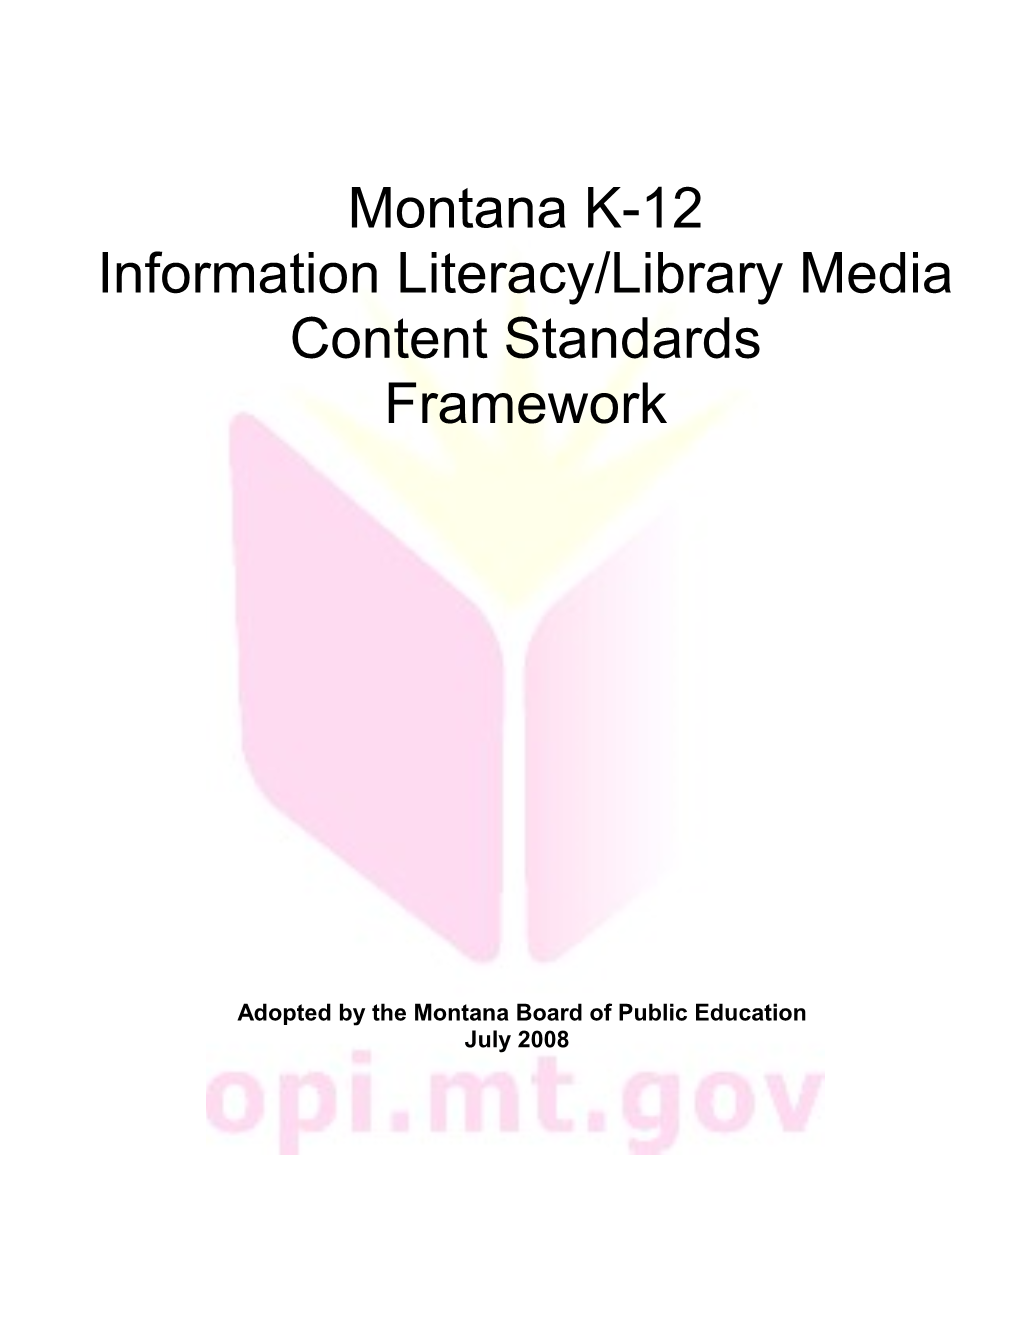 Adopted by the Montana Board of Public Education